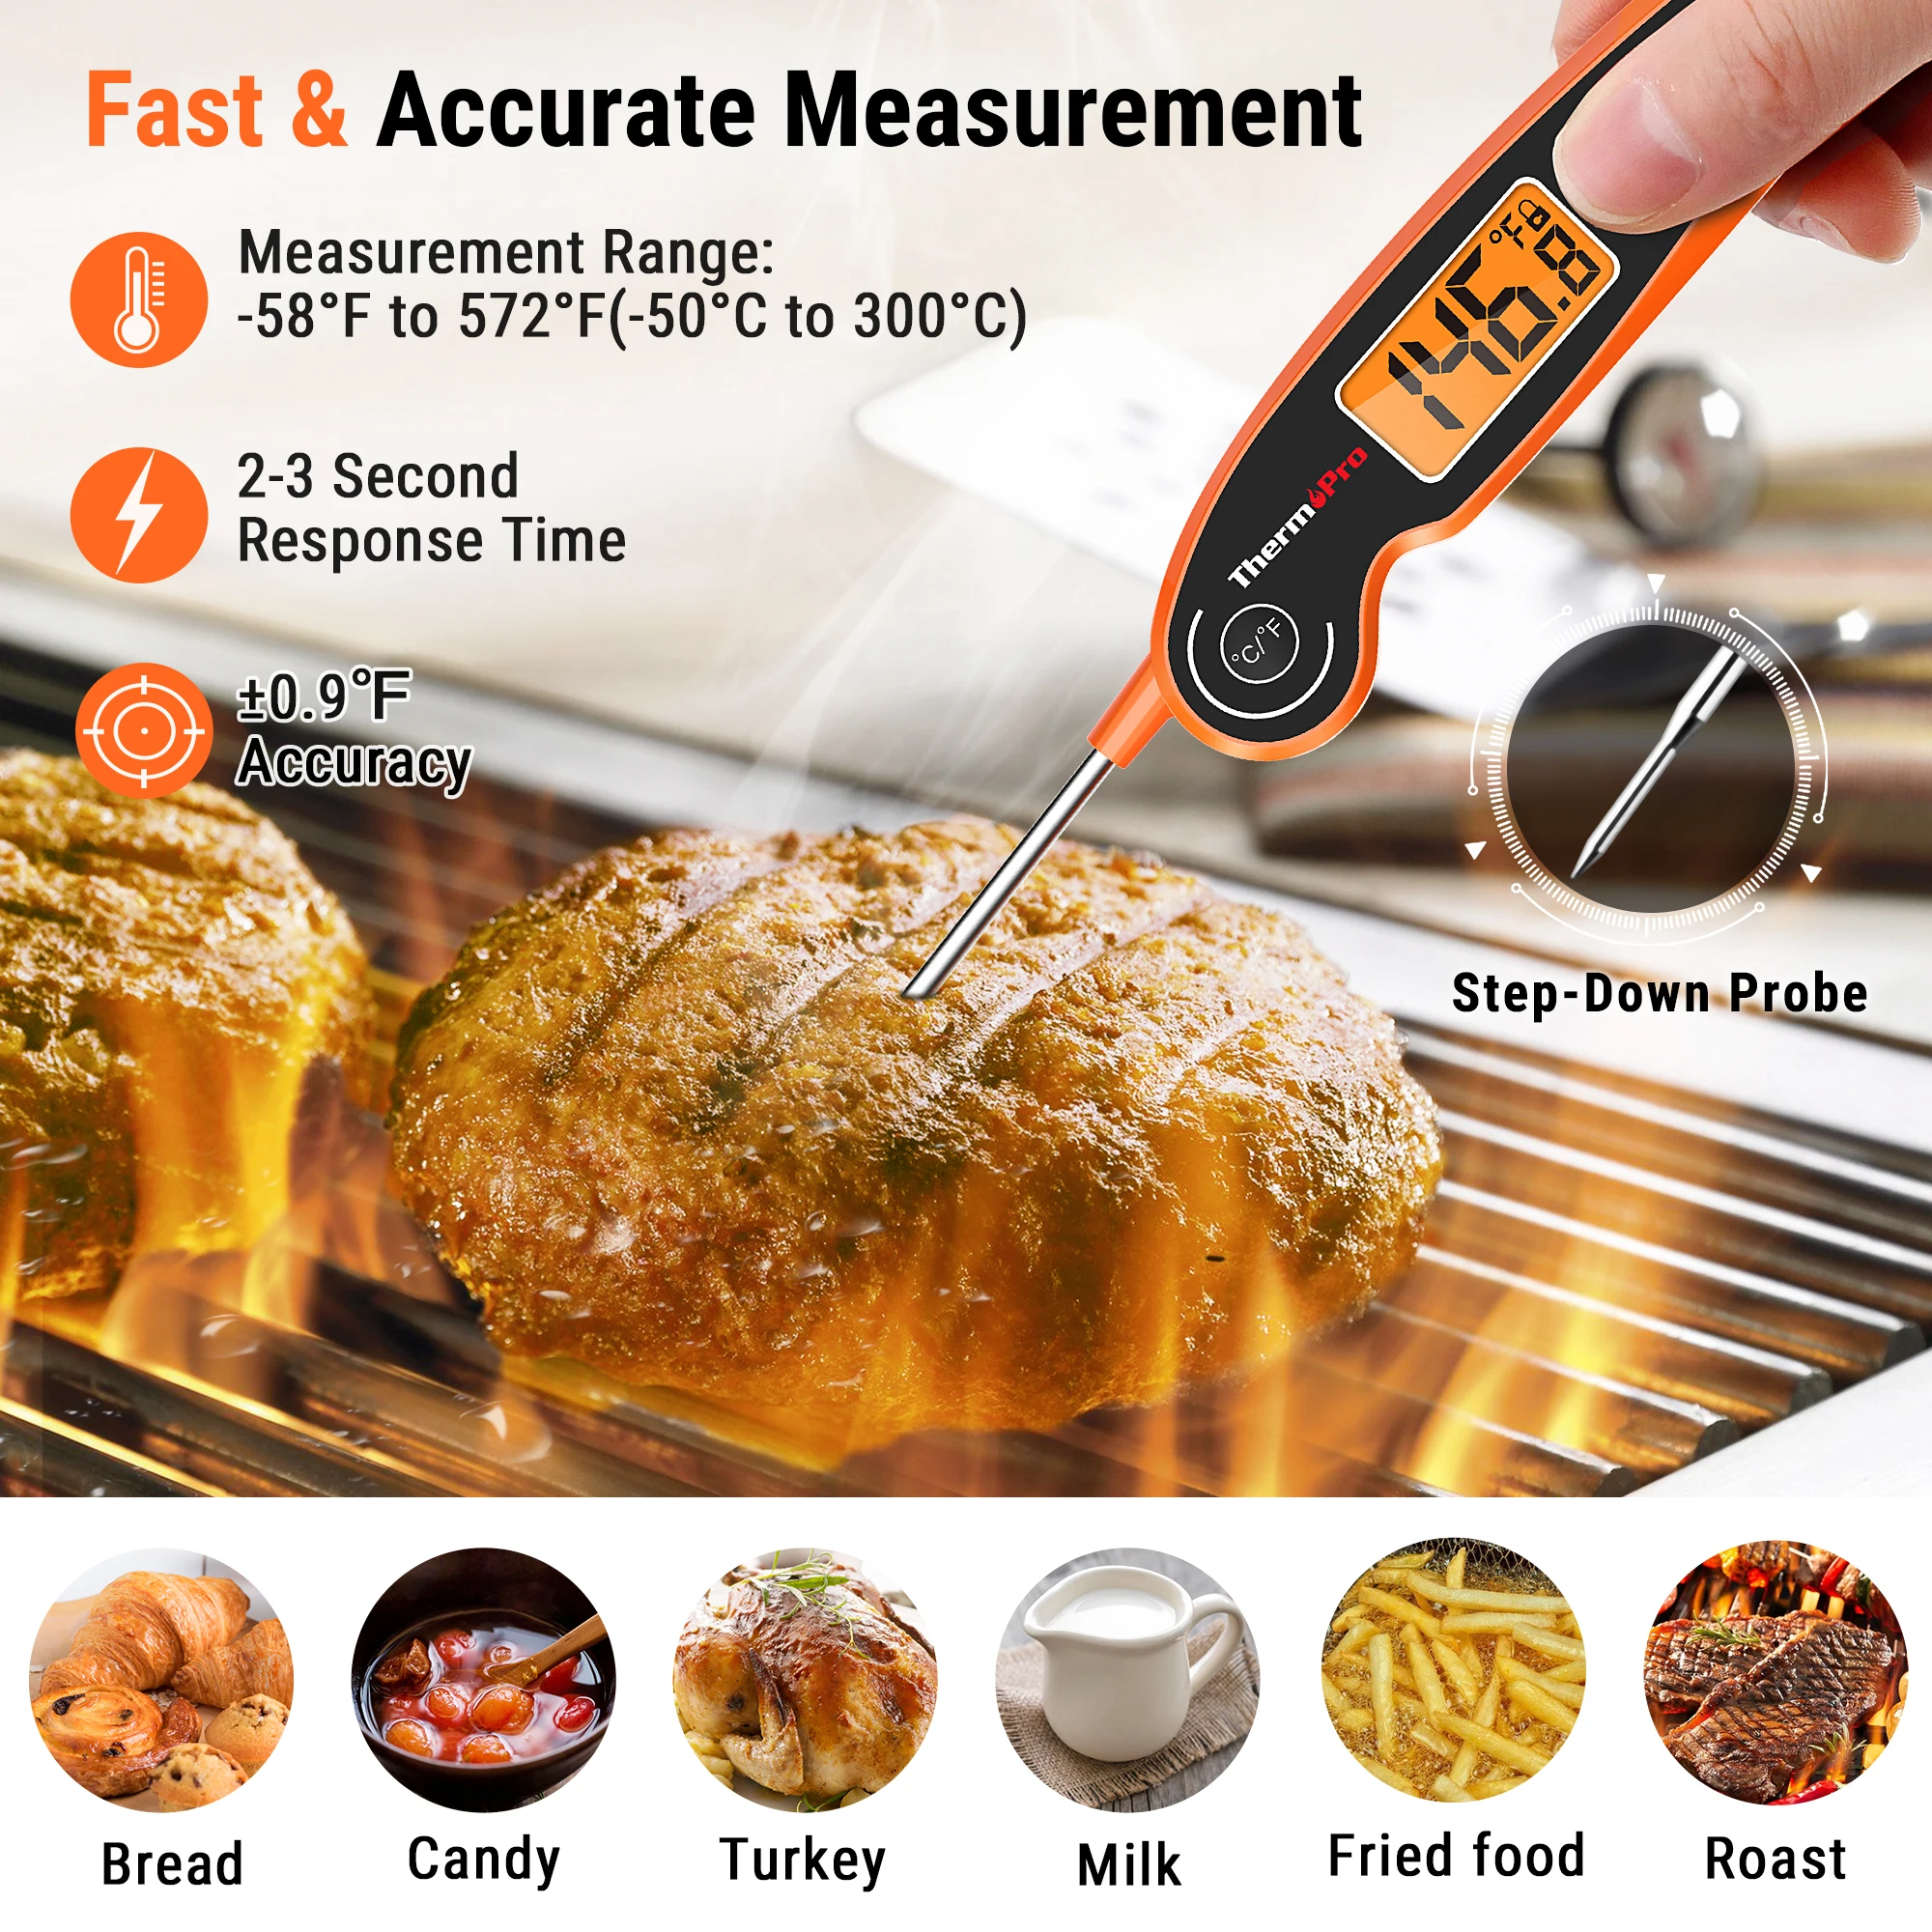 ThermoPro Waterproof Digital Instant Read Meat Thermometer Food